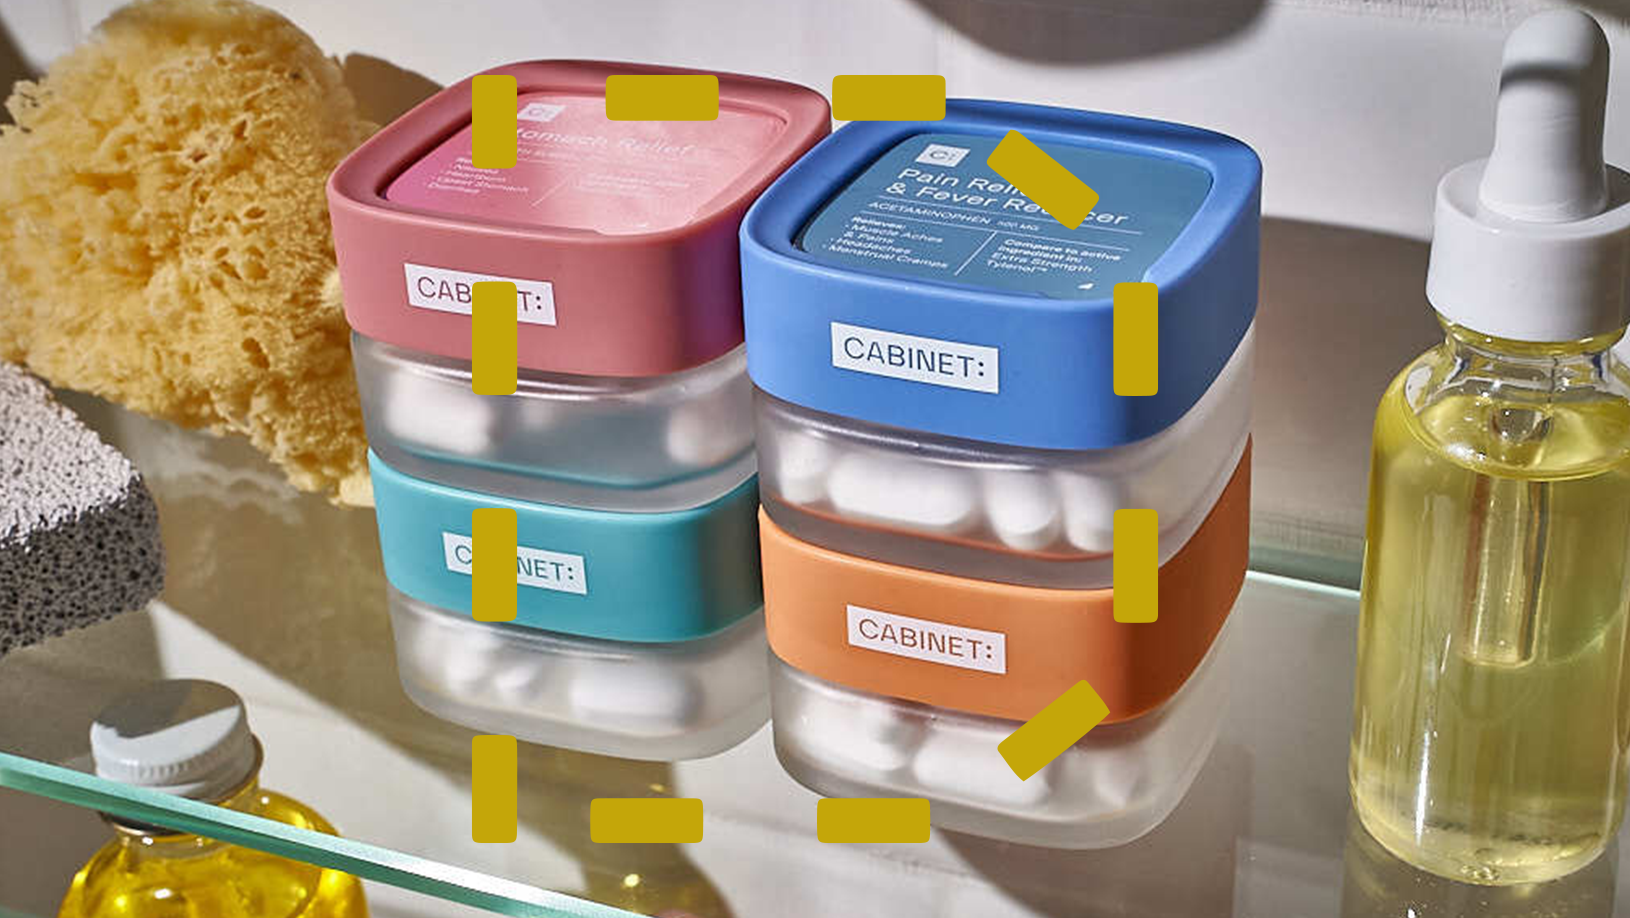 How Cabinet Health Aims to Rid Your Medicine Cabinet of Single-Use Plastic